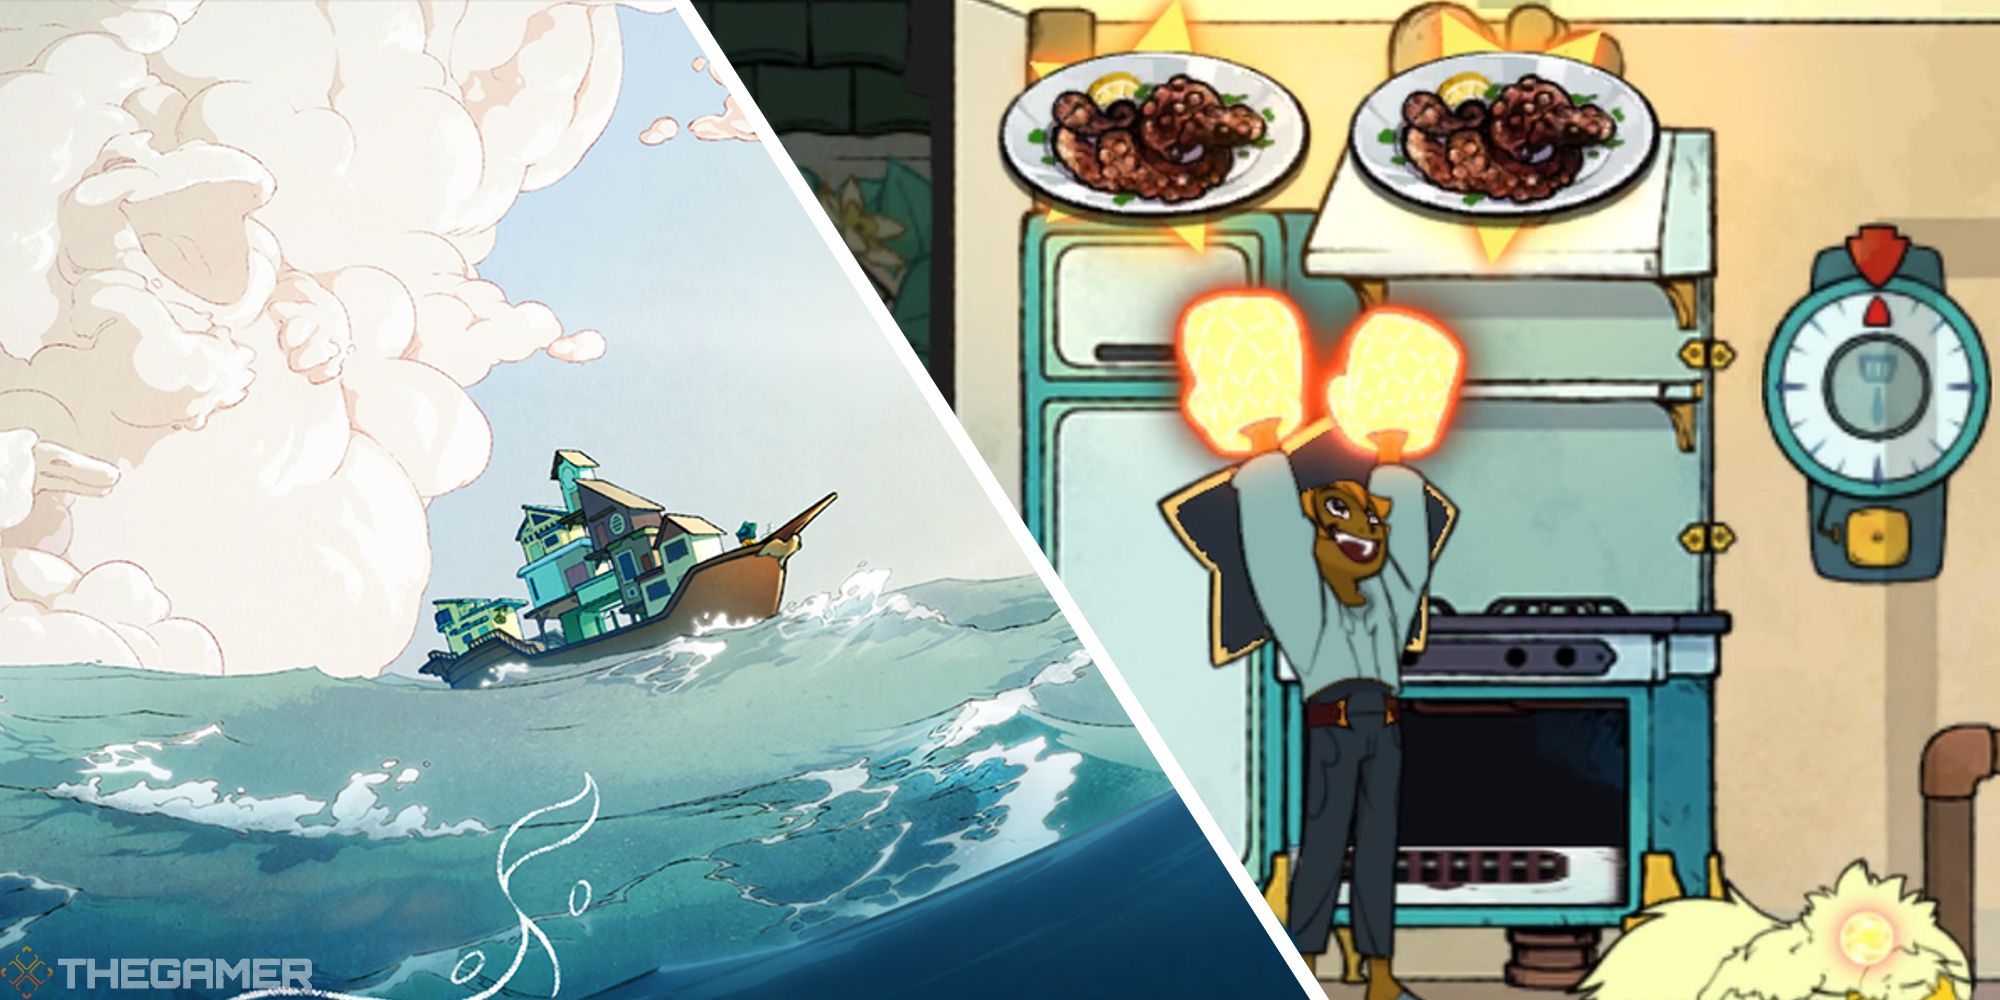 split imag showing promotional art of boat in water, next to image of stella cooking